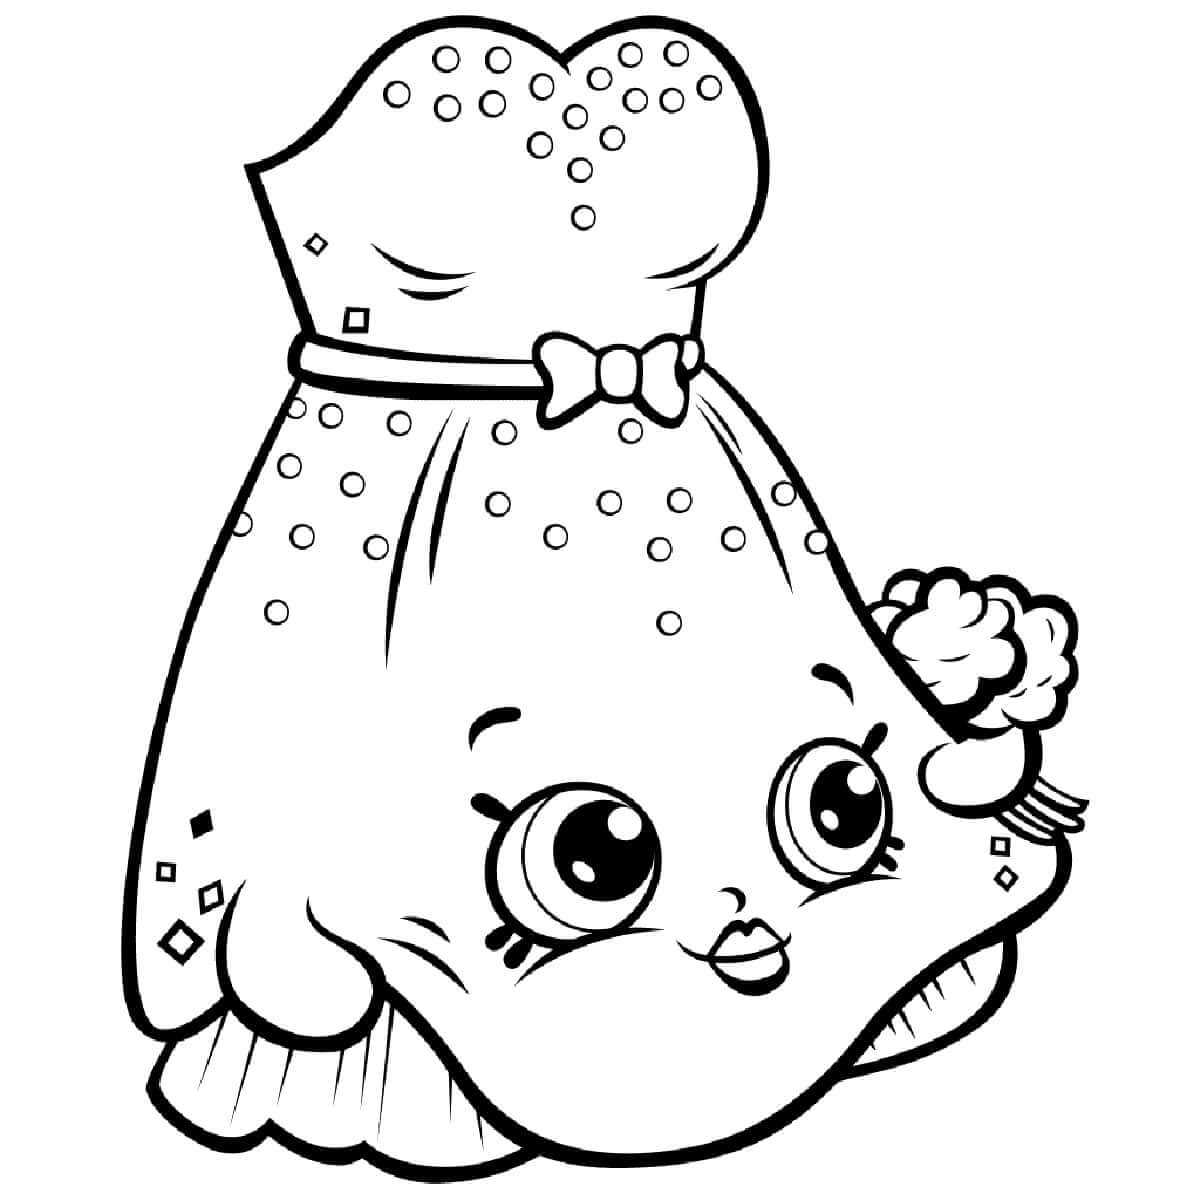 Shopkins Season 7 Coloring Pages - Free Printable Coloring Pages for Kids